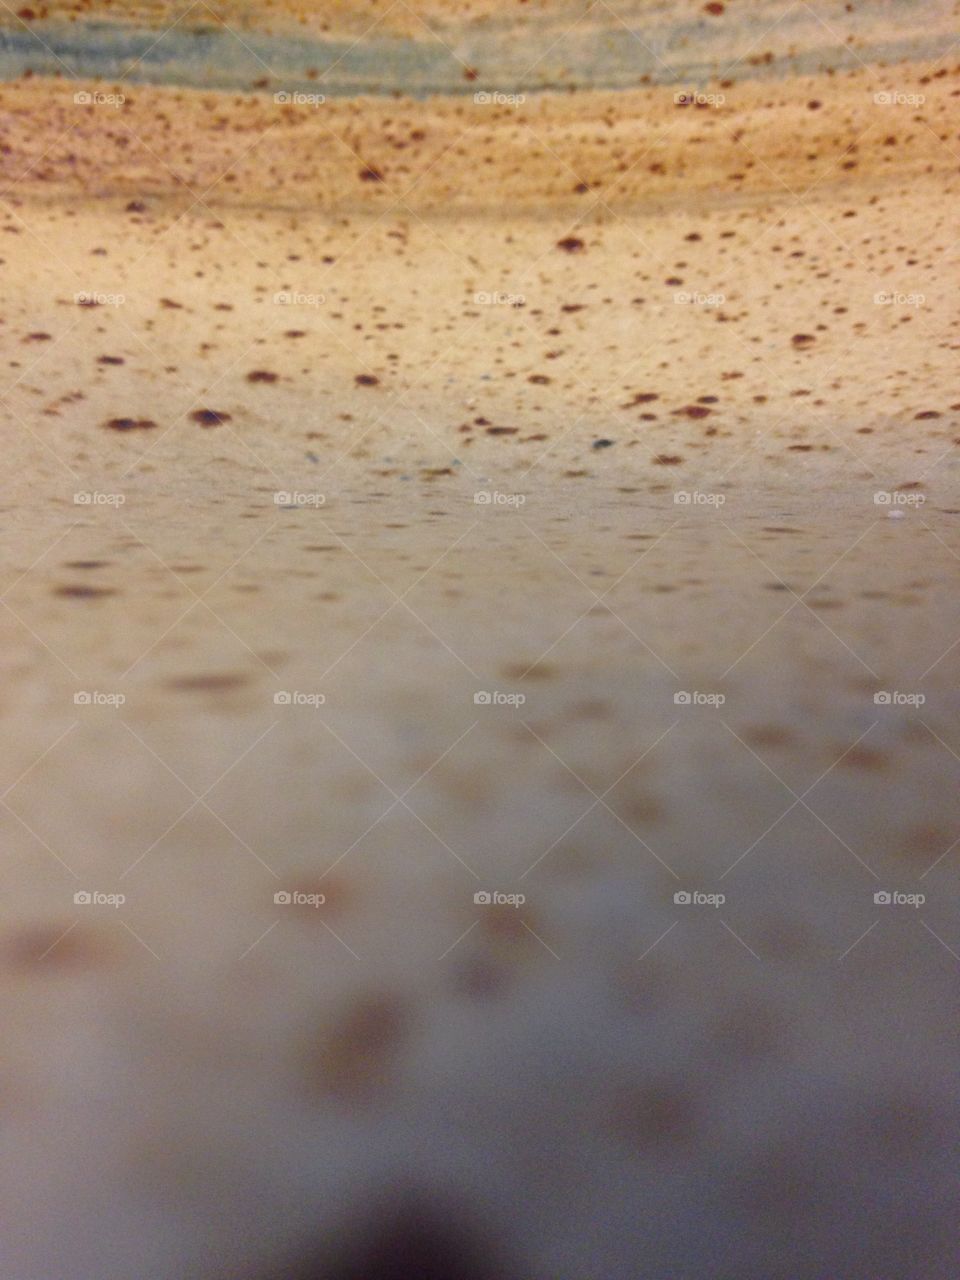 Partly out of focus, speckled glazed pottery texture